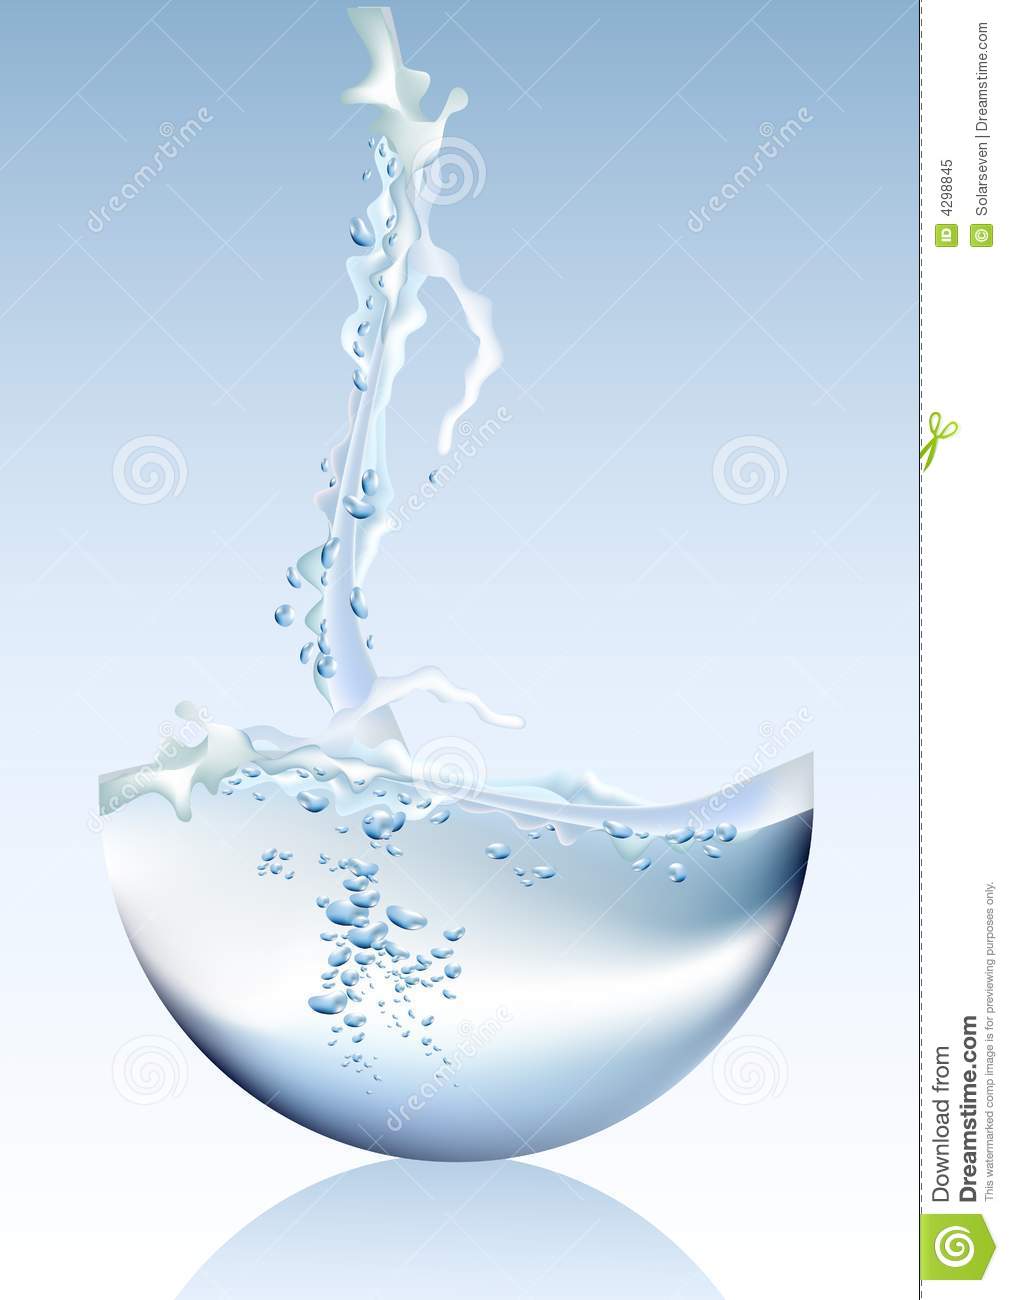 Vector Pouring Water Royalty Free Stock Photo   Image  4298845